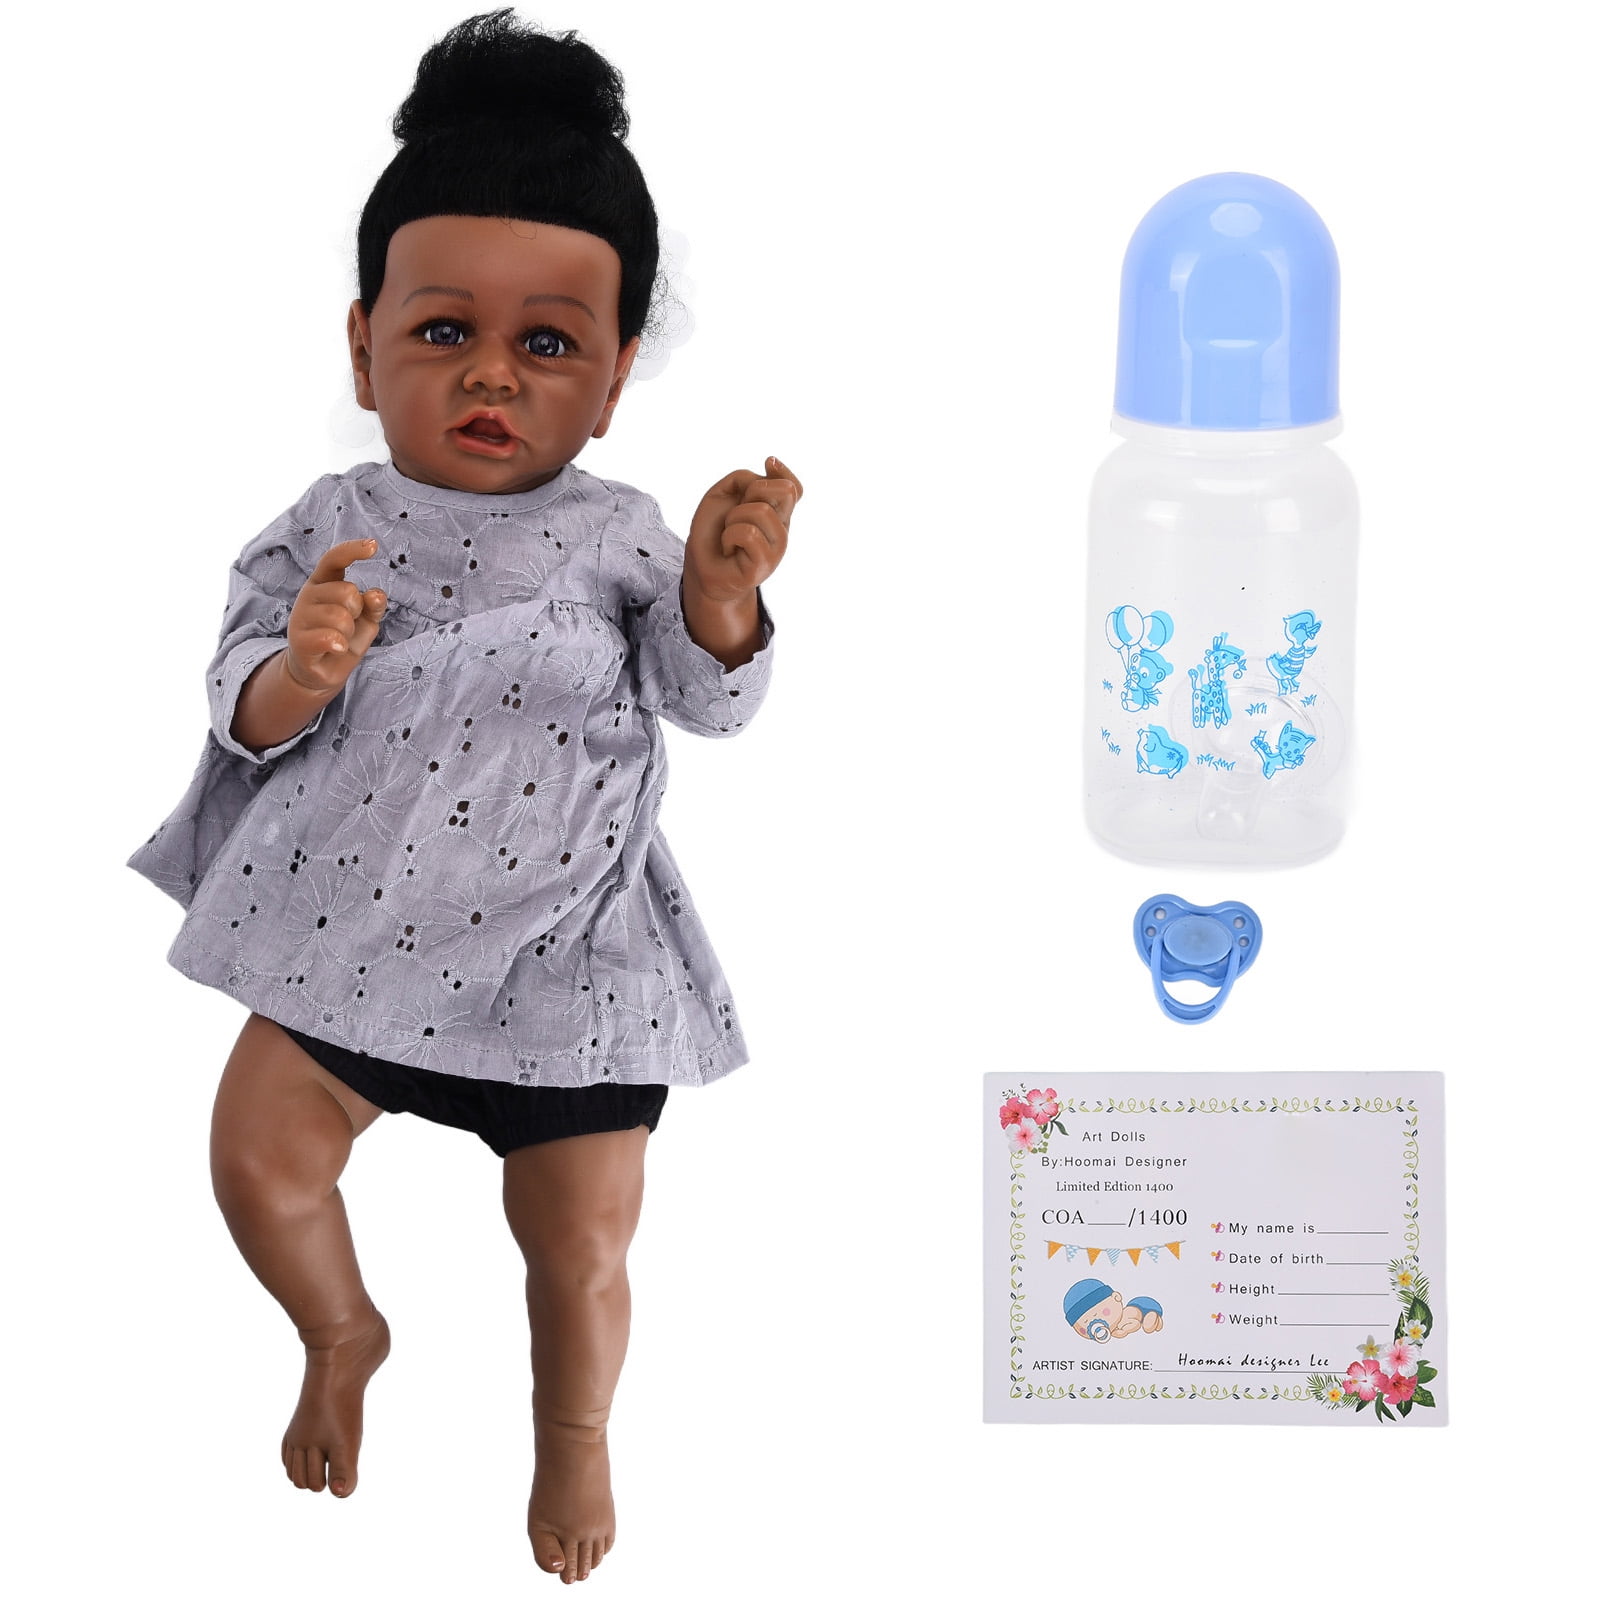 Hoomai baby doll 22 'Happy Day' limited edition 1400 'reborn' silicone 